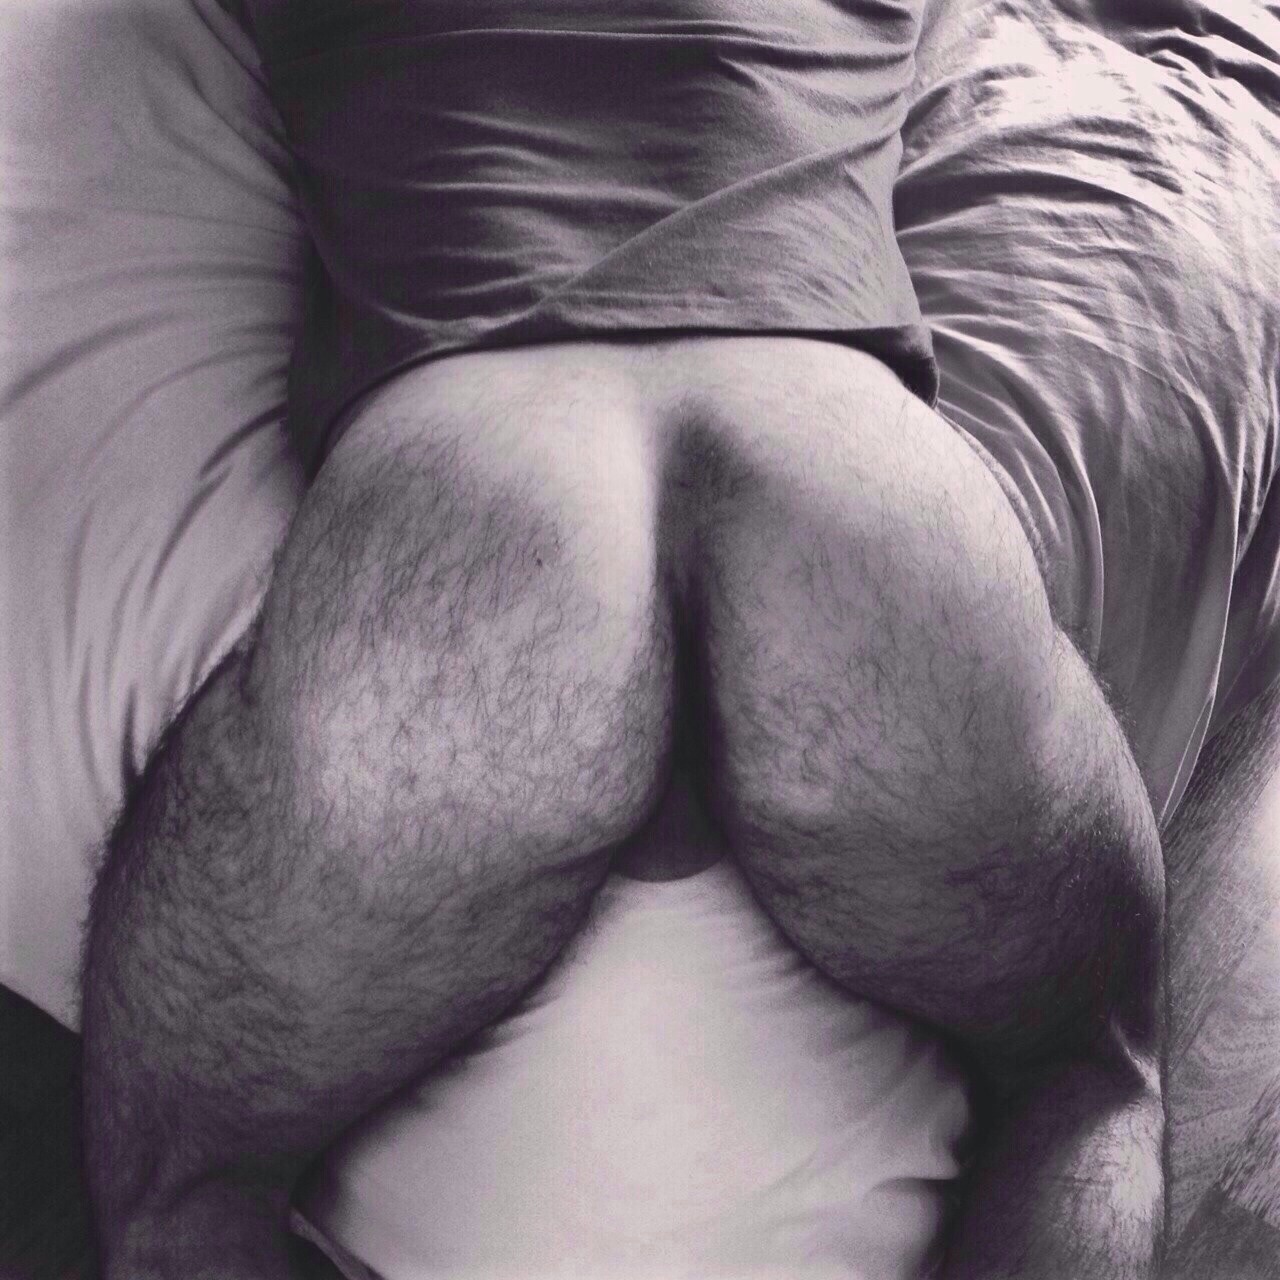 Hairy ass, ready for action.